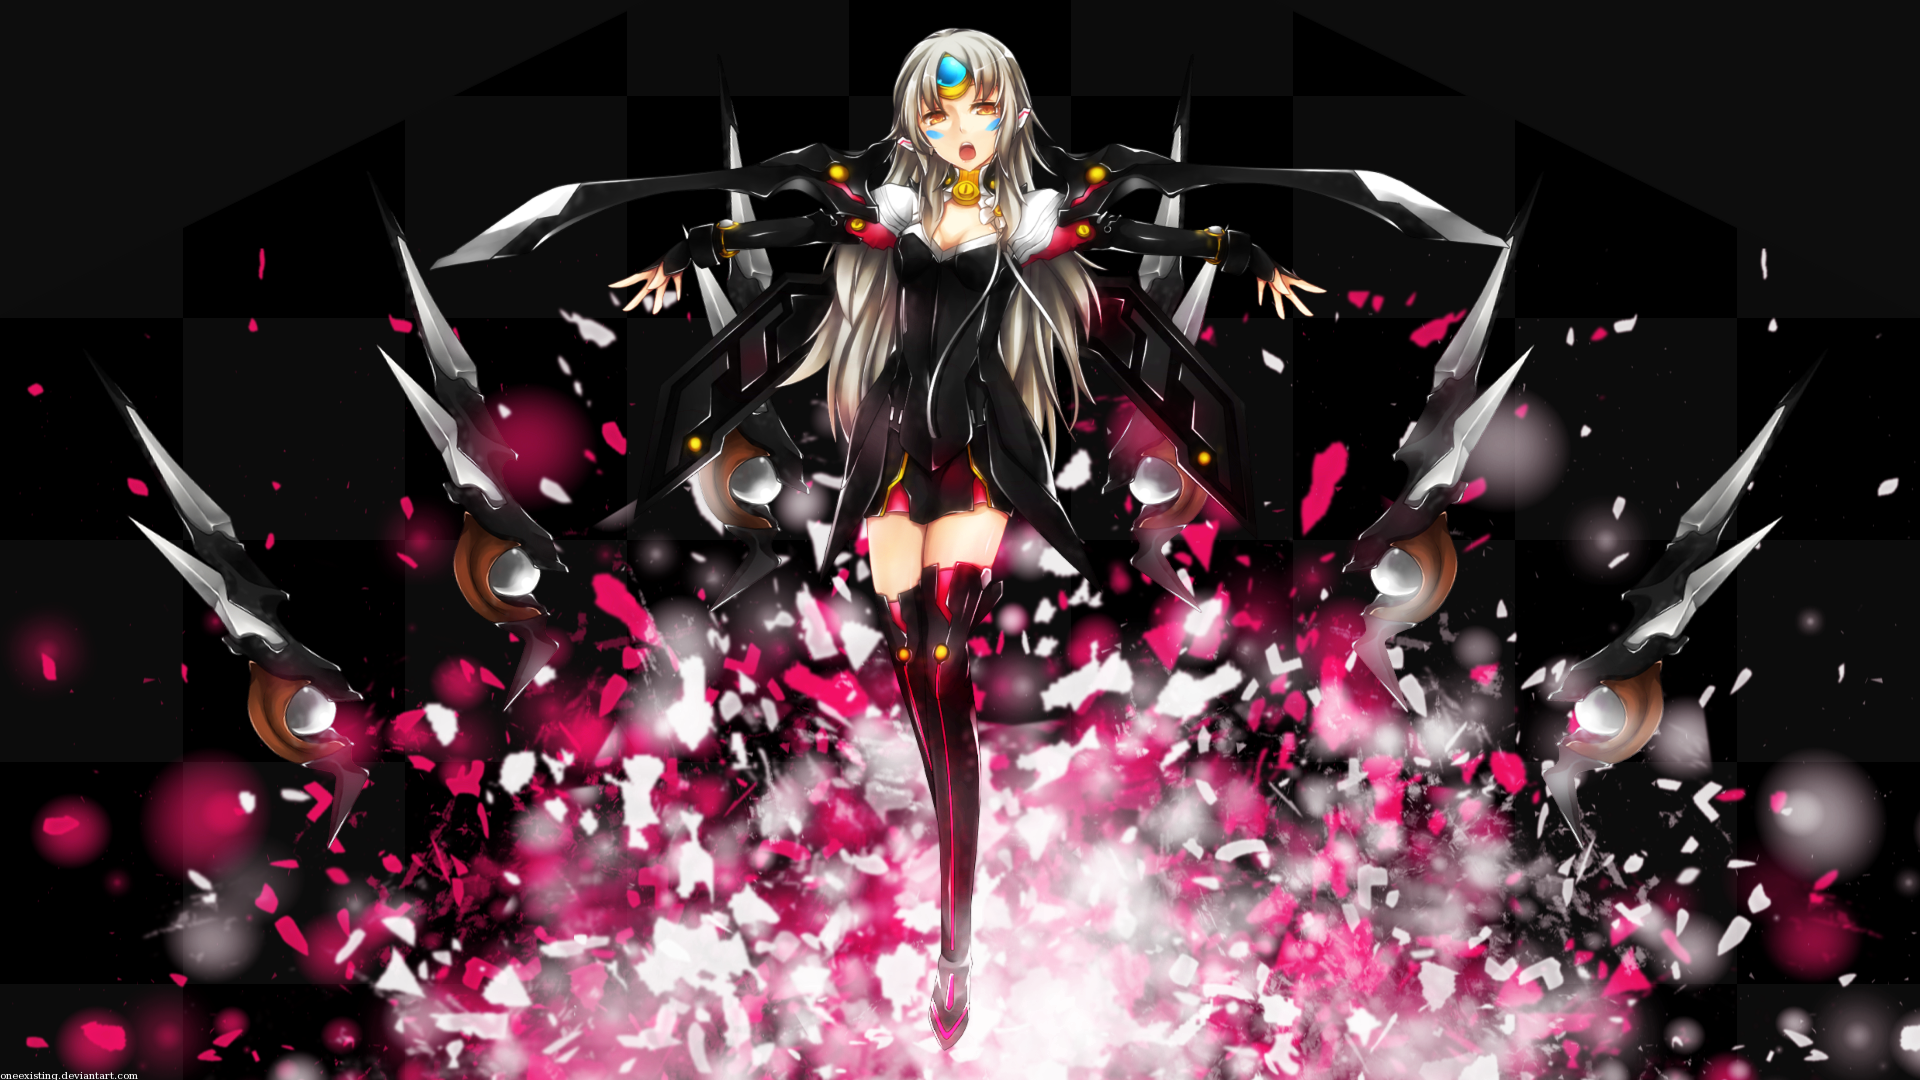 Wallpaper Of Destructive Eve Code Nemesis By Oneexisting